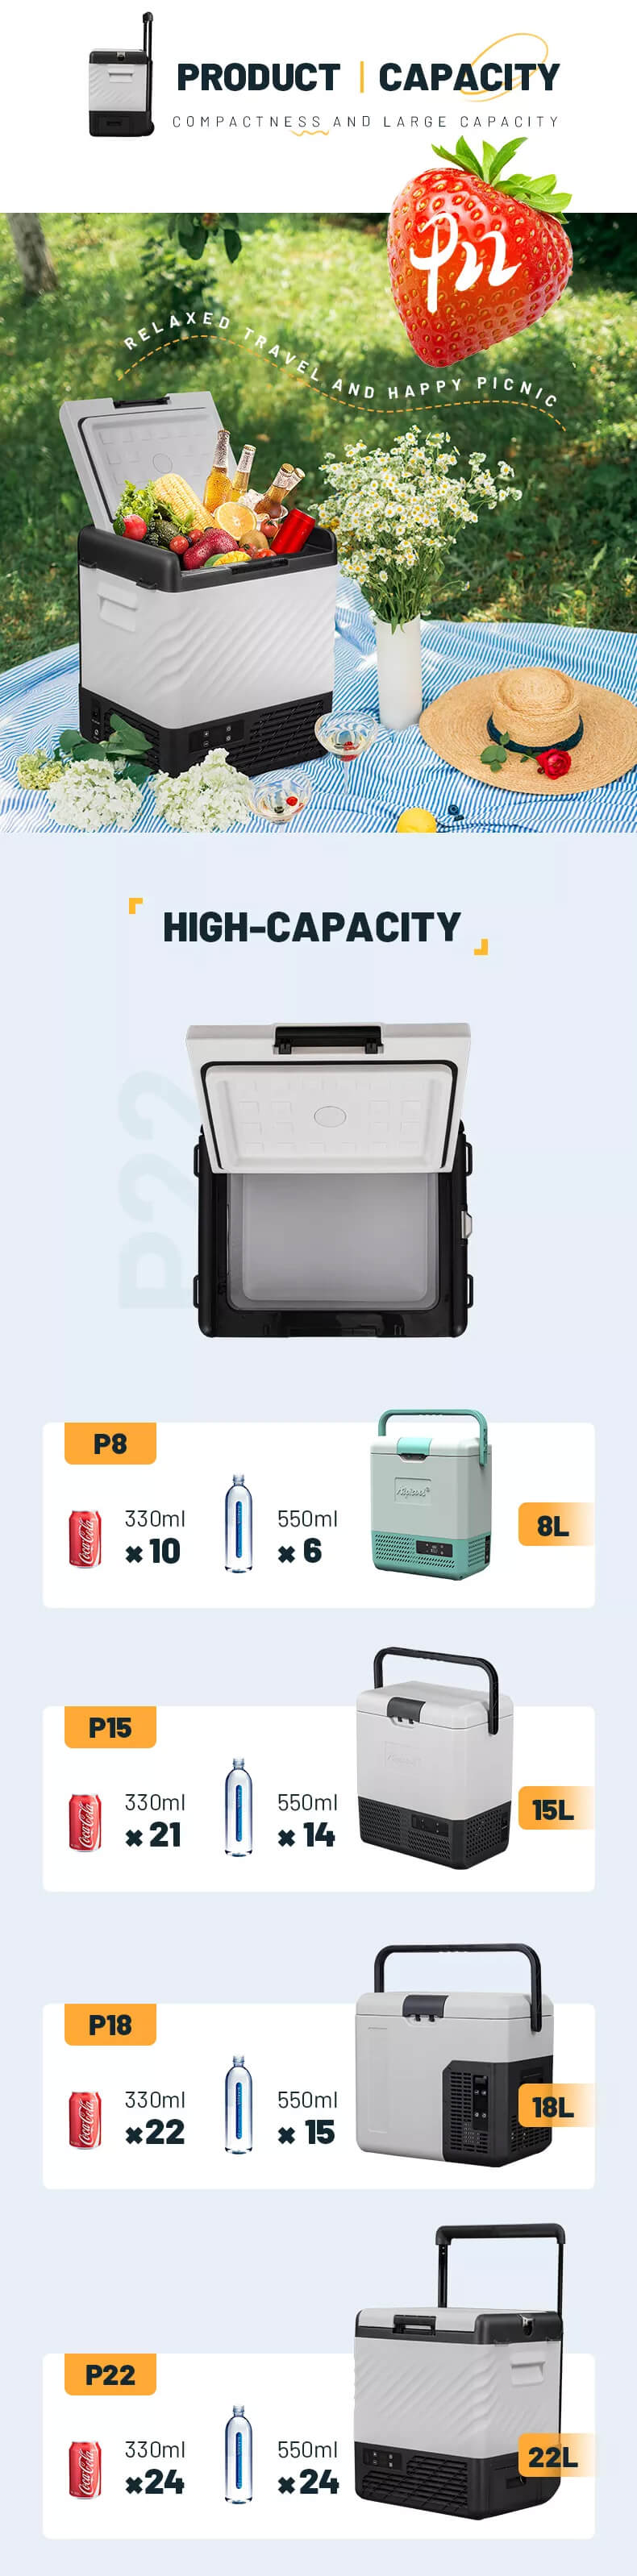 Alpicool P22 Mini Fridge For Car With Removable Battery And Solar Powered Description 3